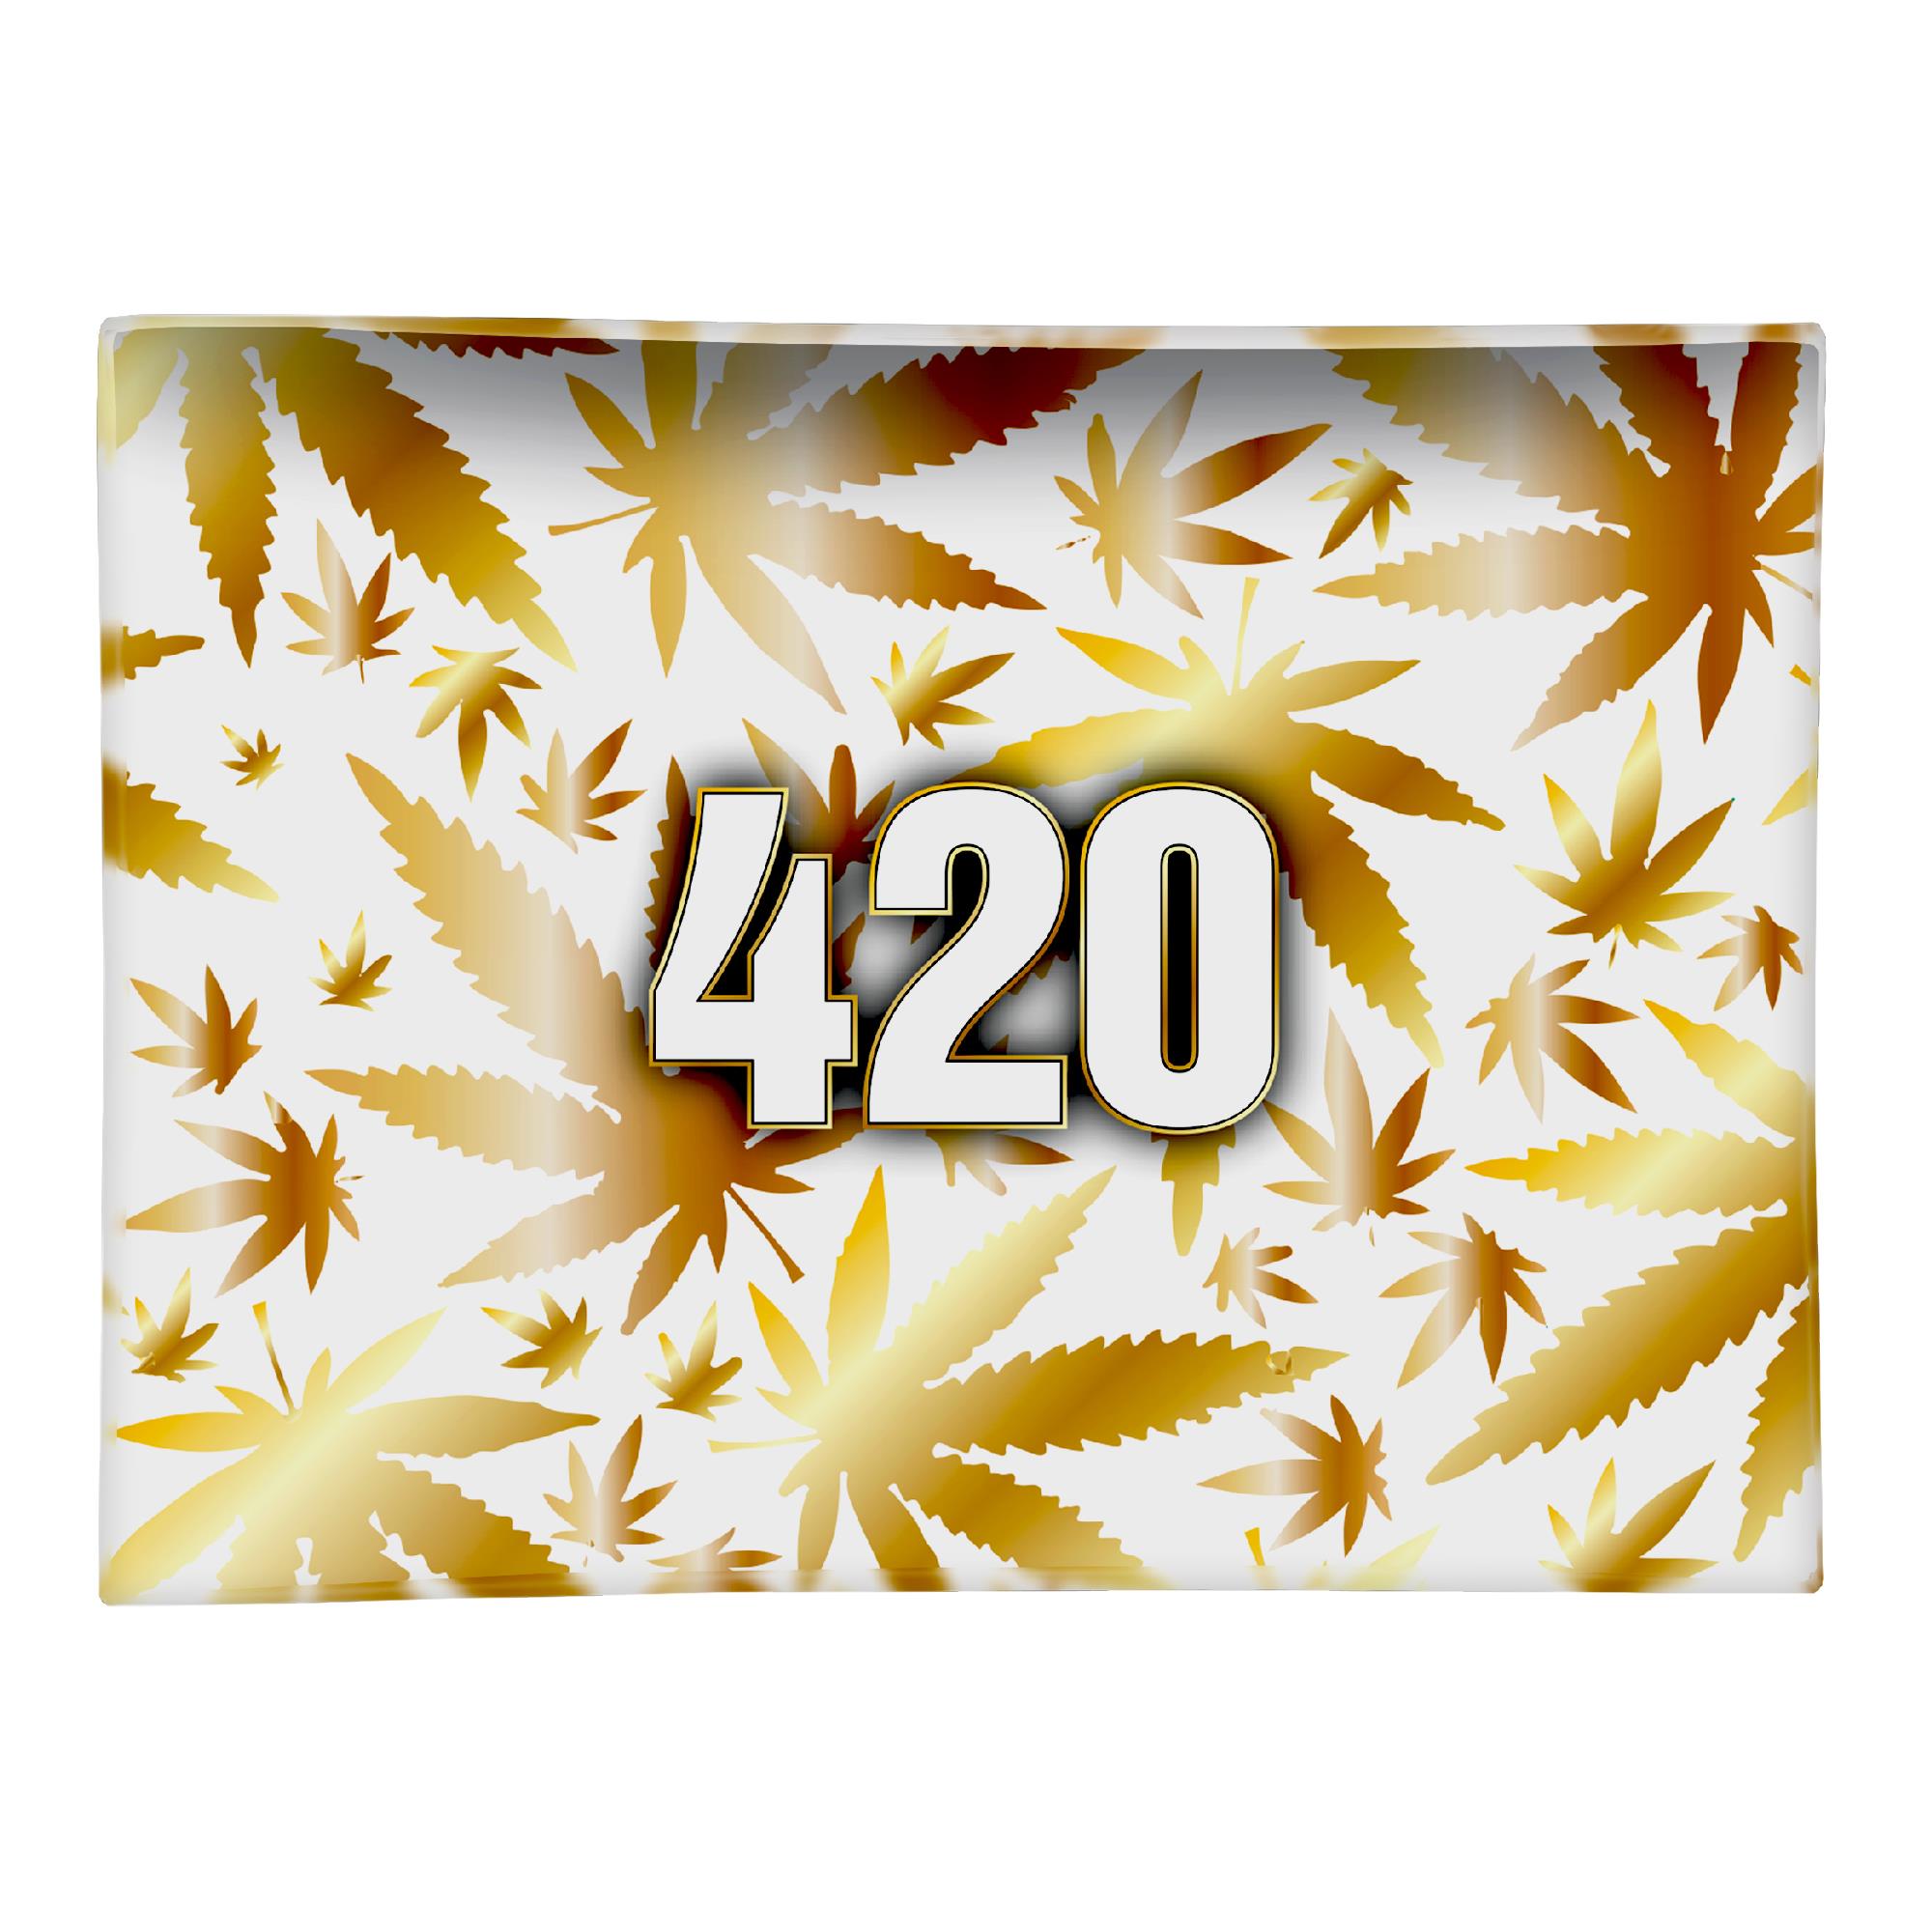 420 GOLD GLASS TRAY